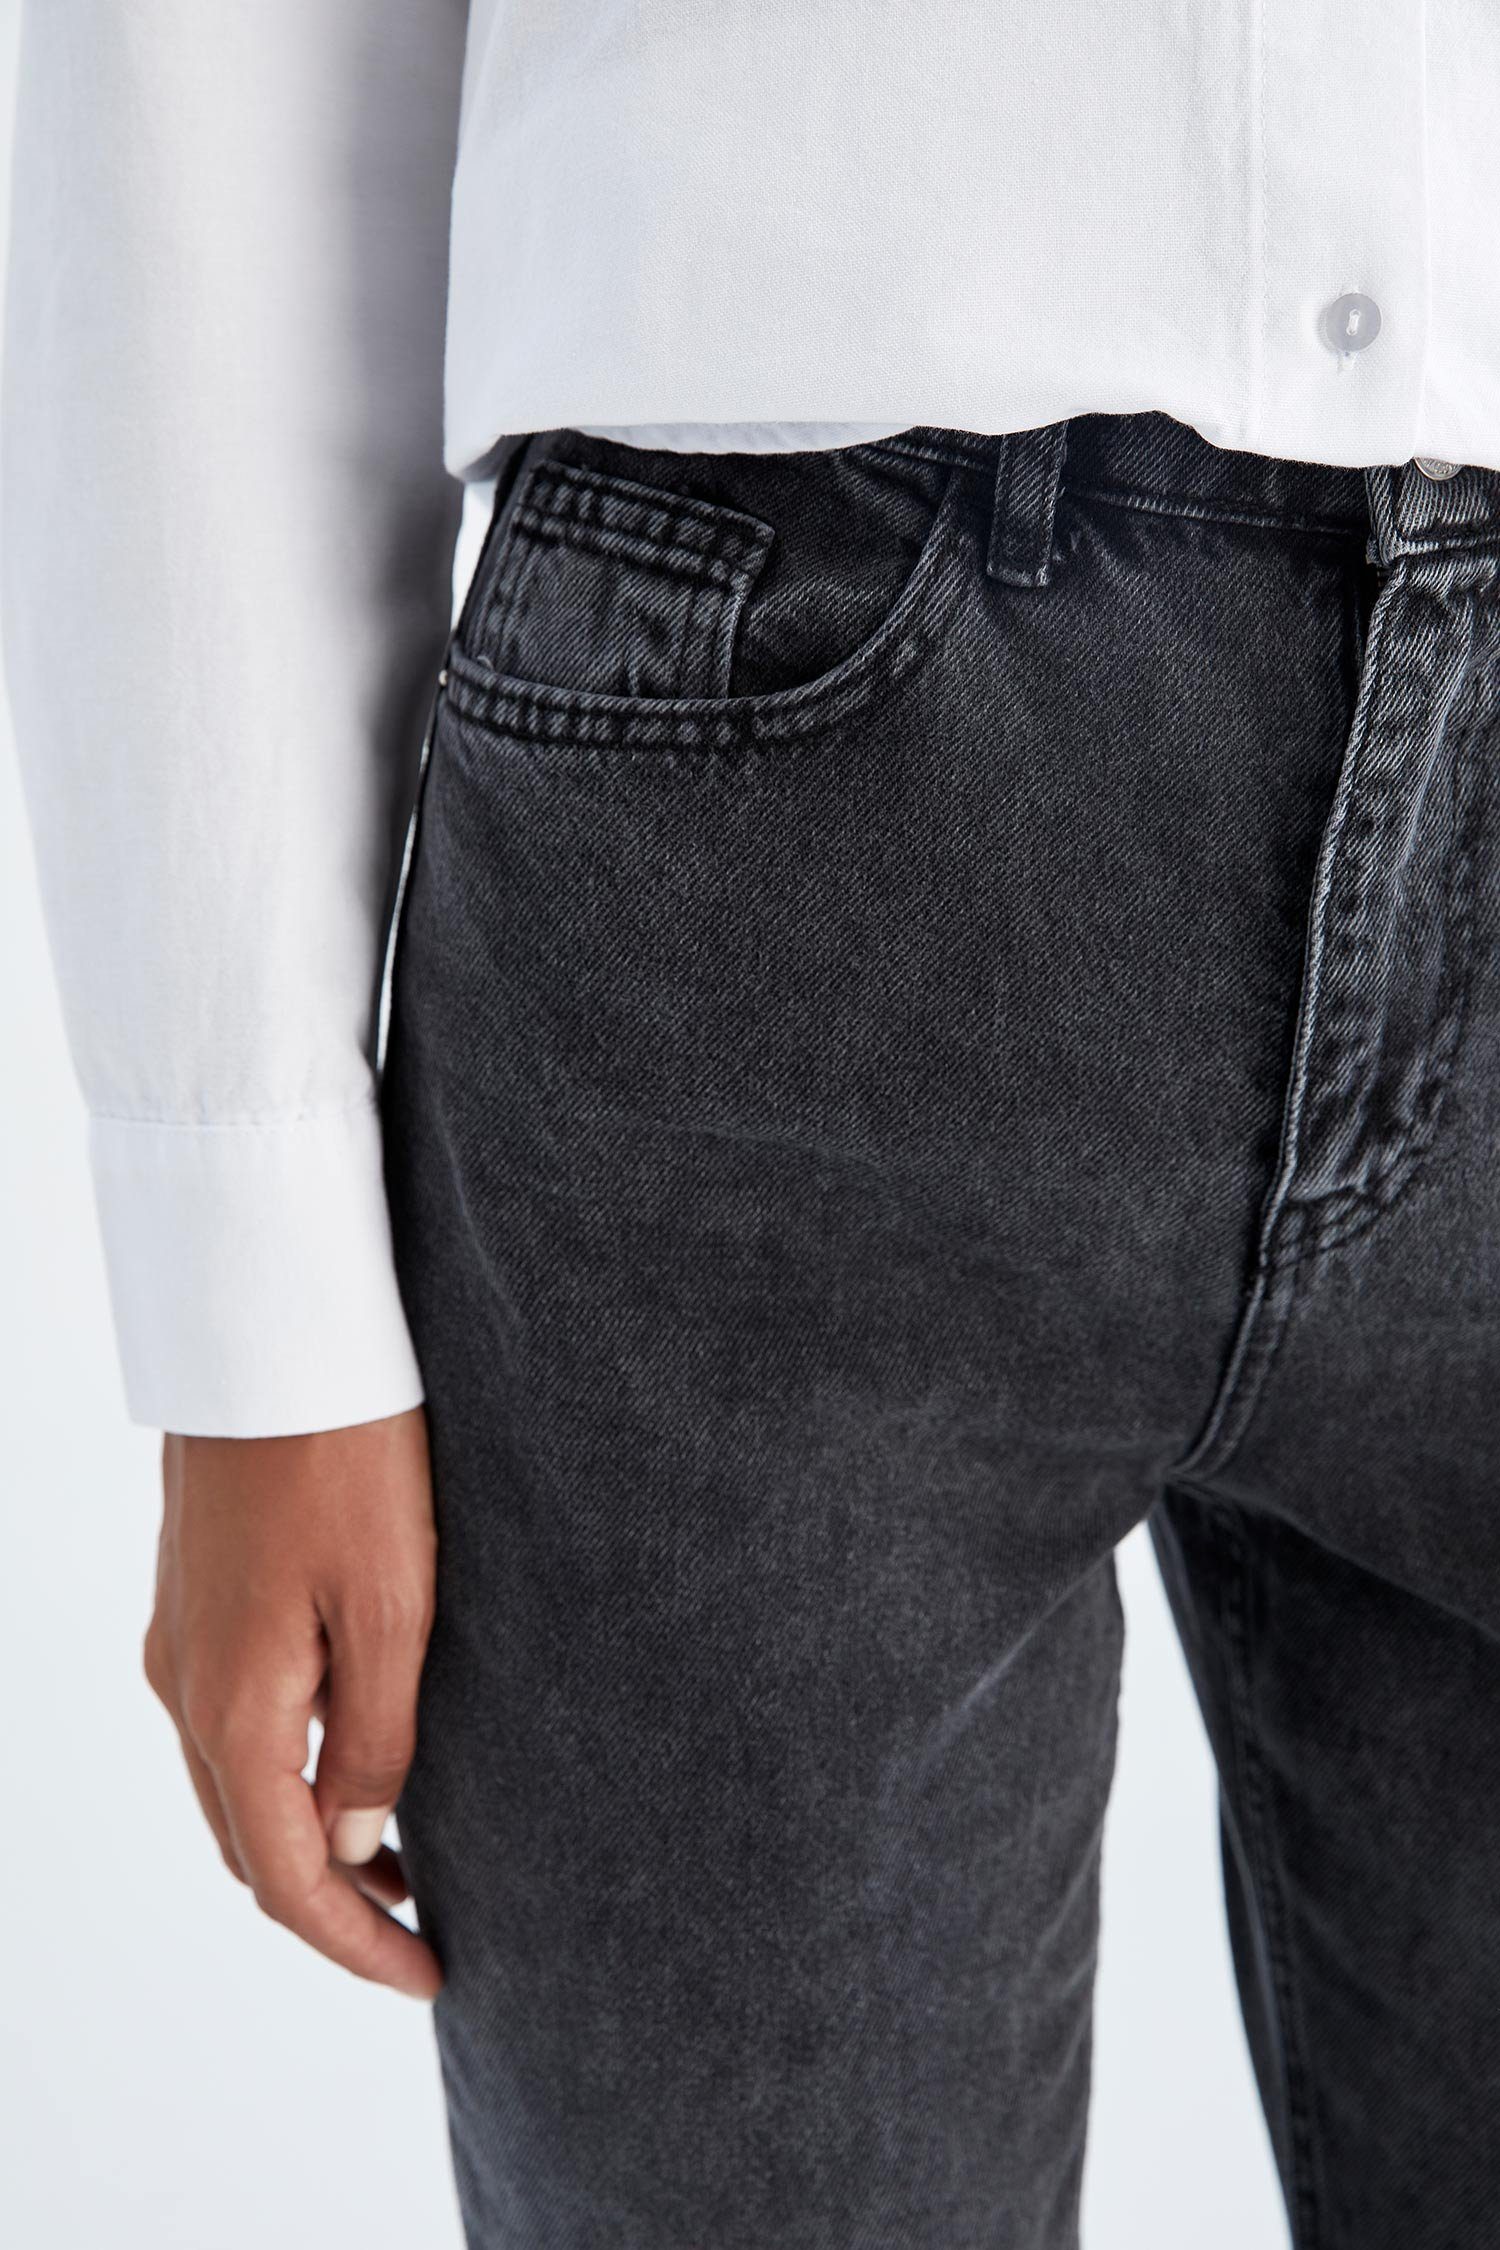 Mom-Jeans FIT Damen Mom-Jeans MOM DeFacto